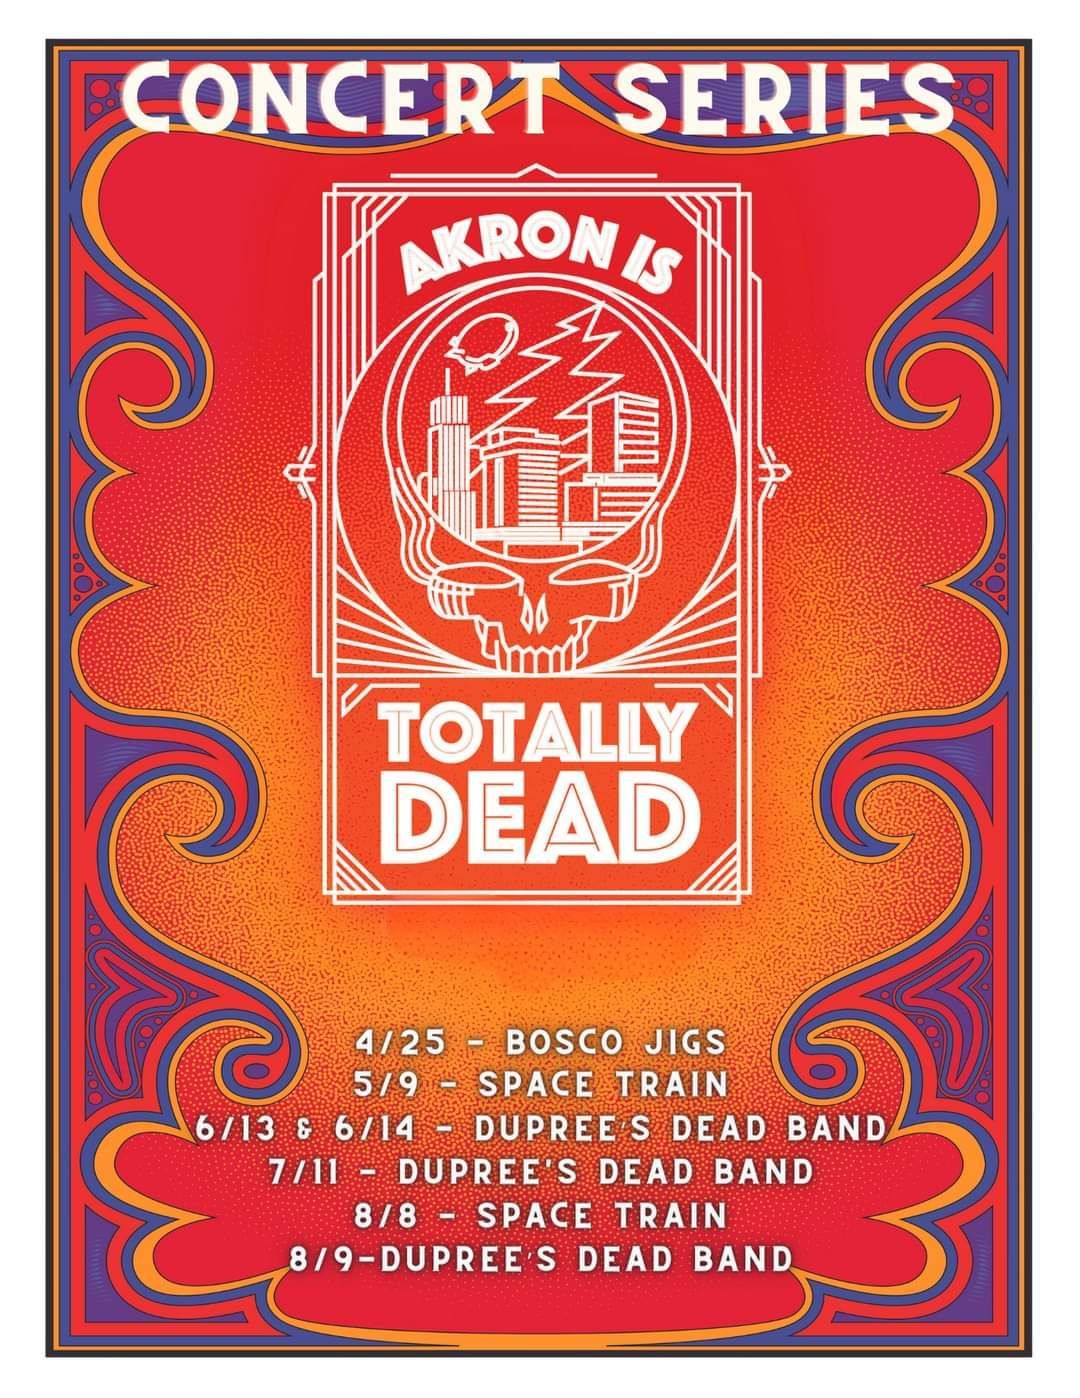 Dupree's Dead Band plays Akron is Dead